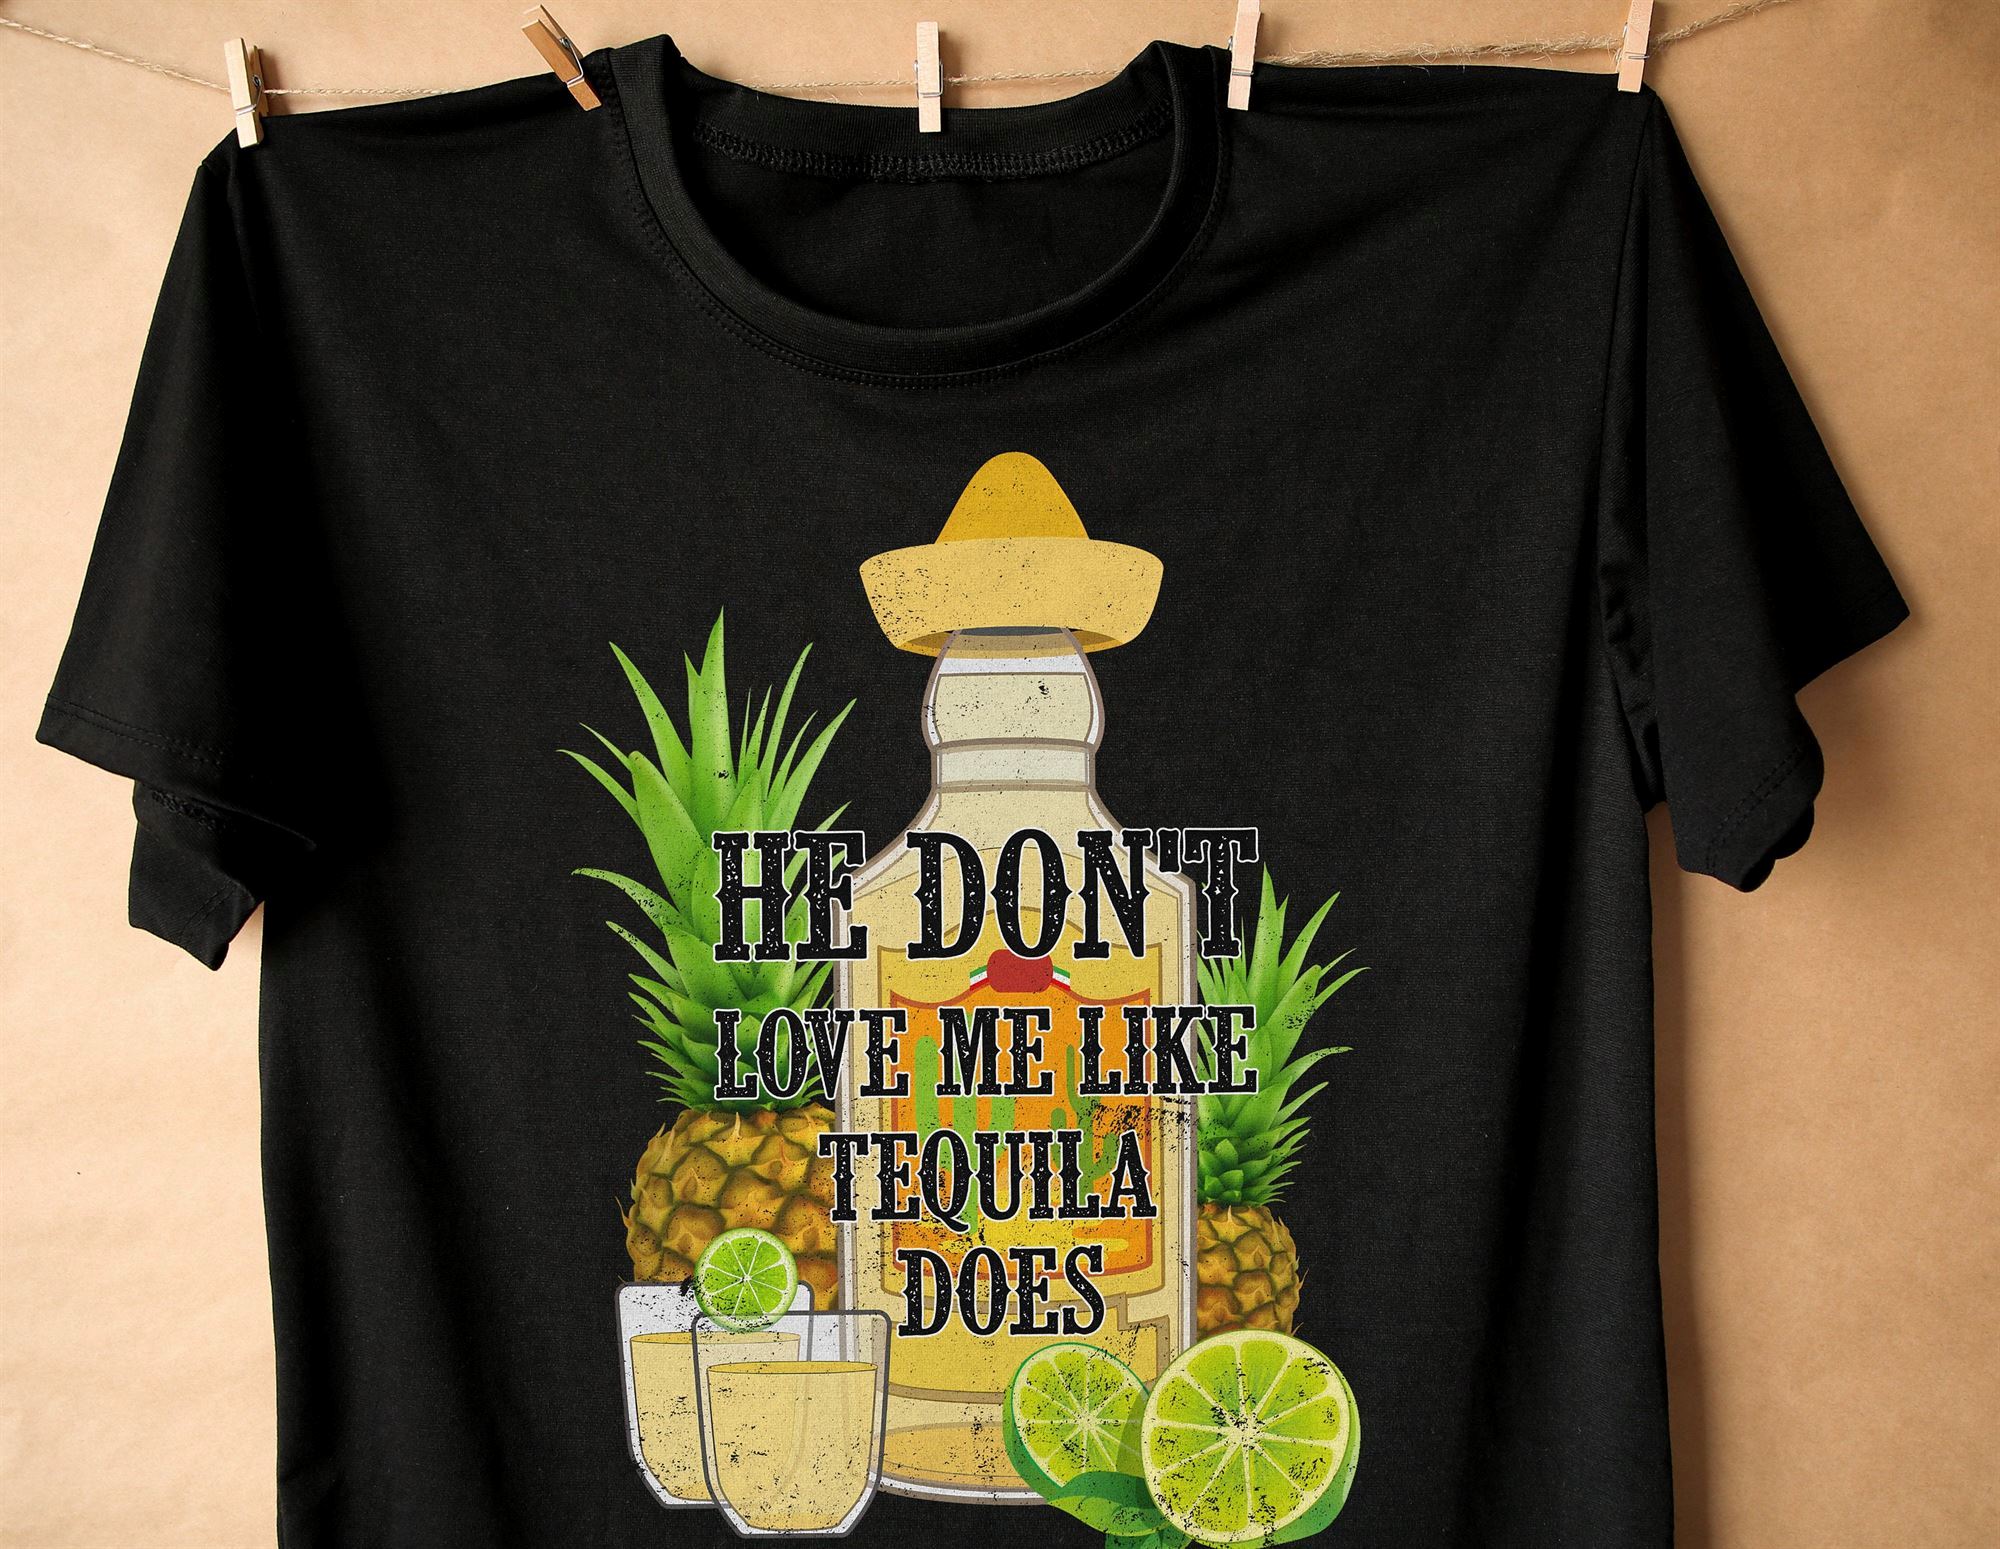 Promotions He Don't Love Me Like Tequila Does T-shirt 